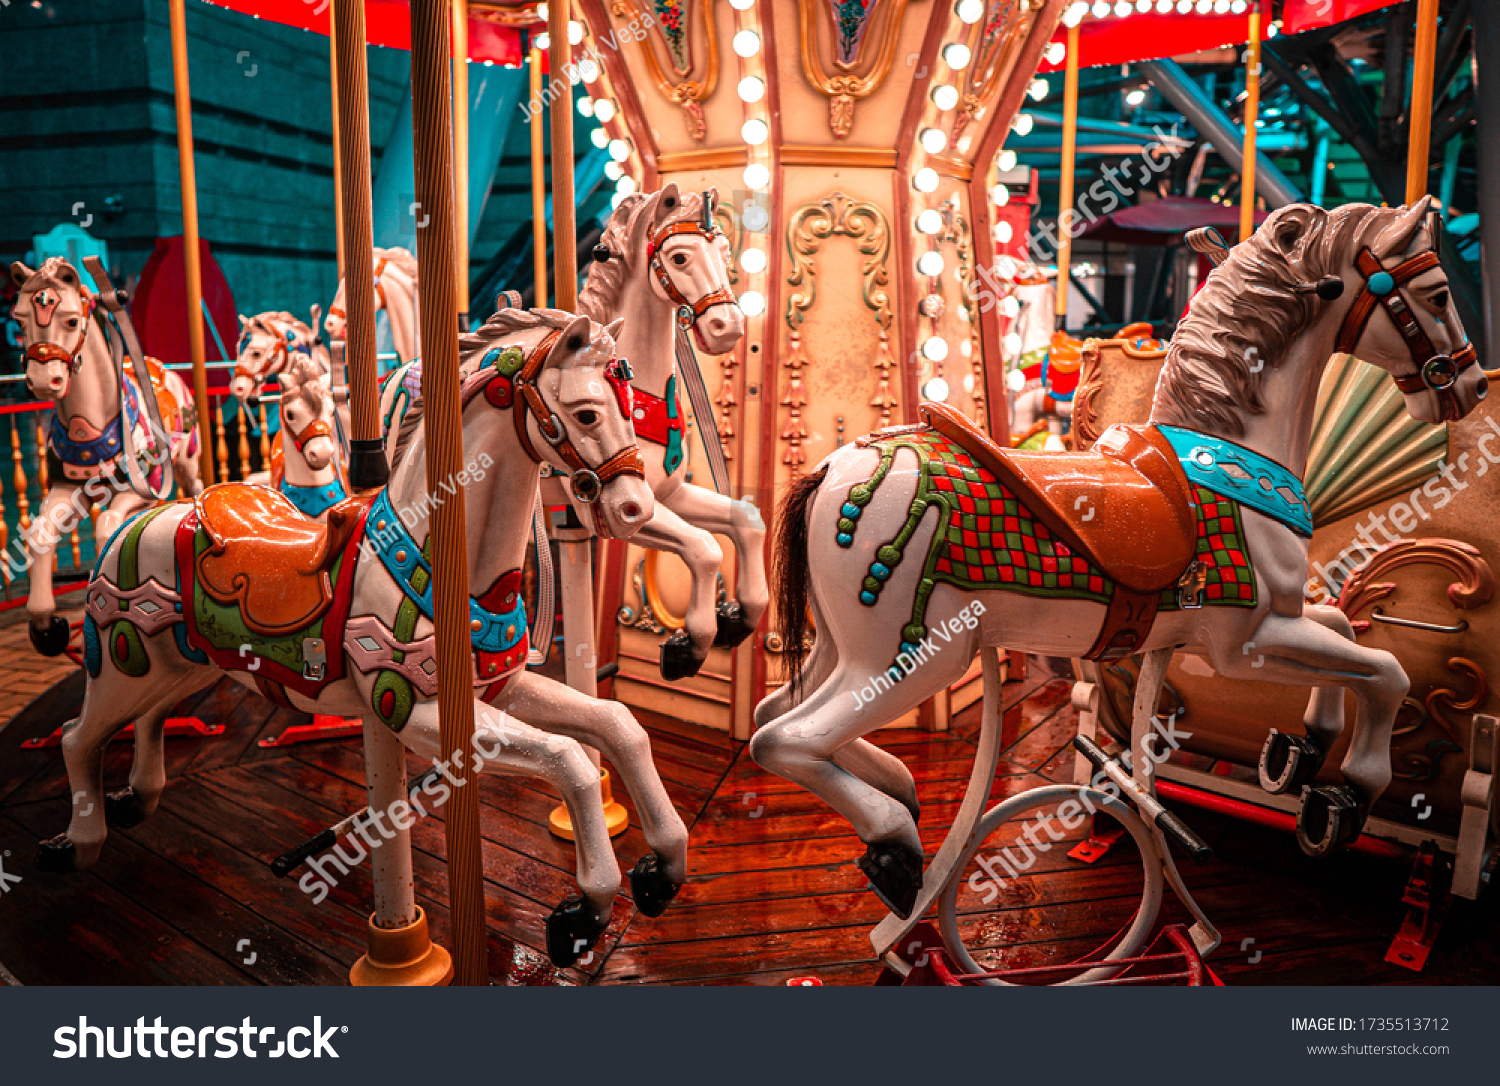 A night shot of a merry Go round, on a rainy night.  #1735513712